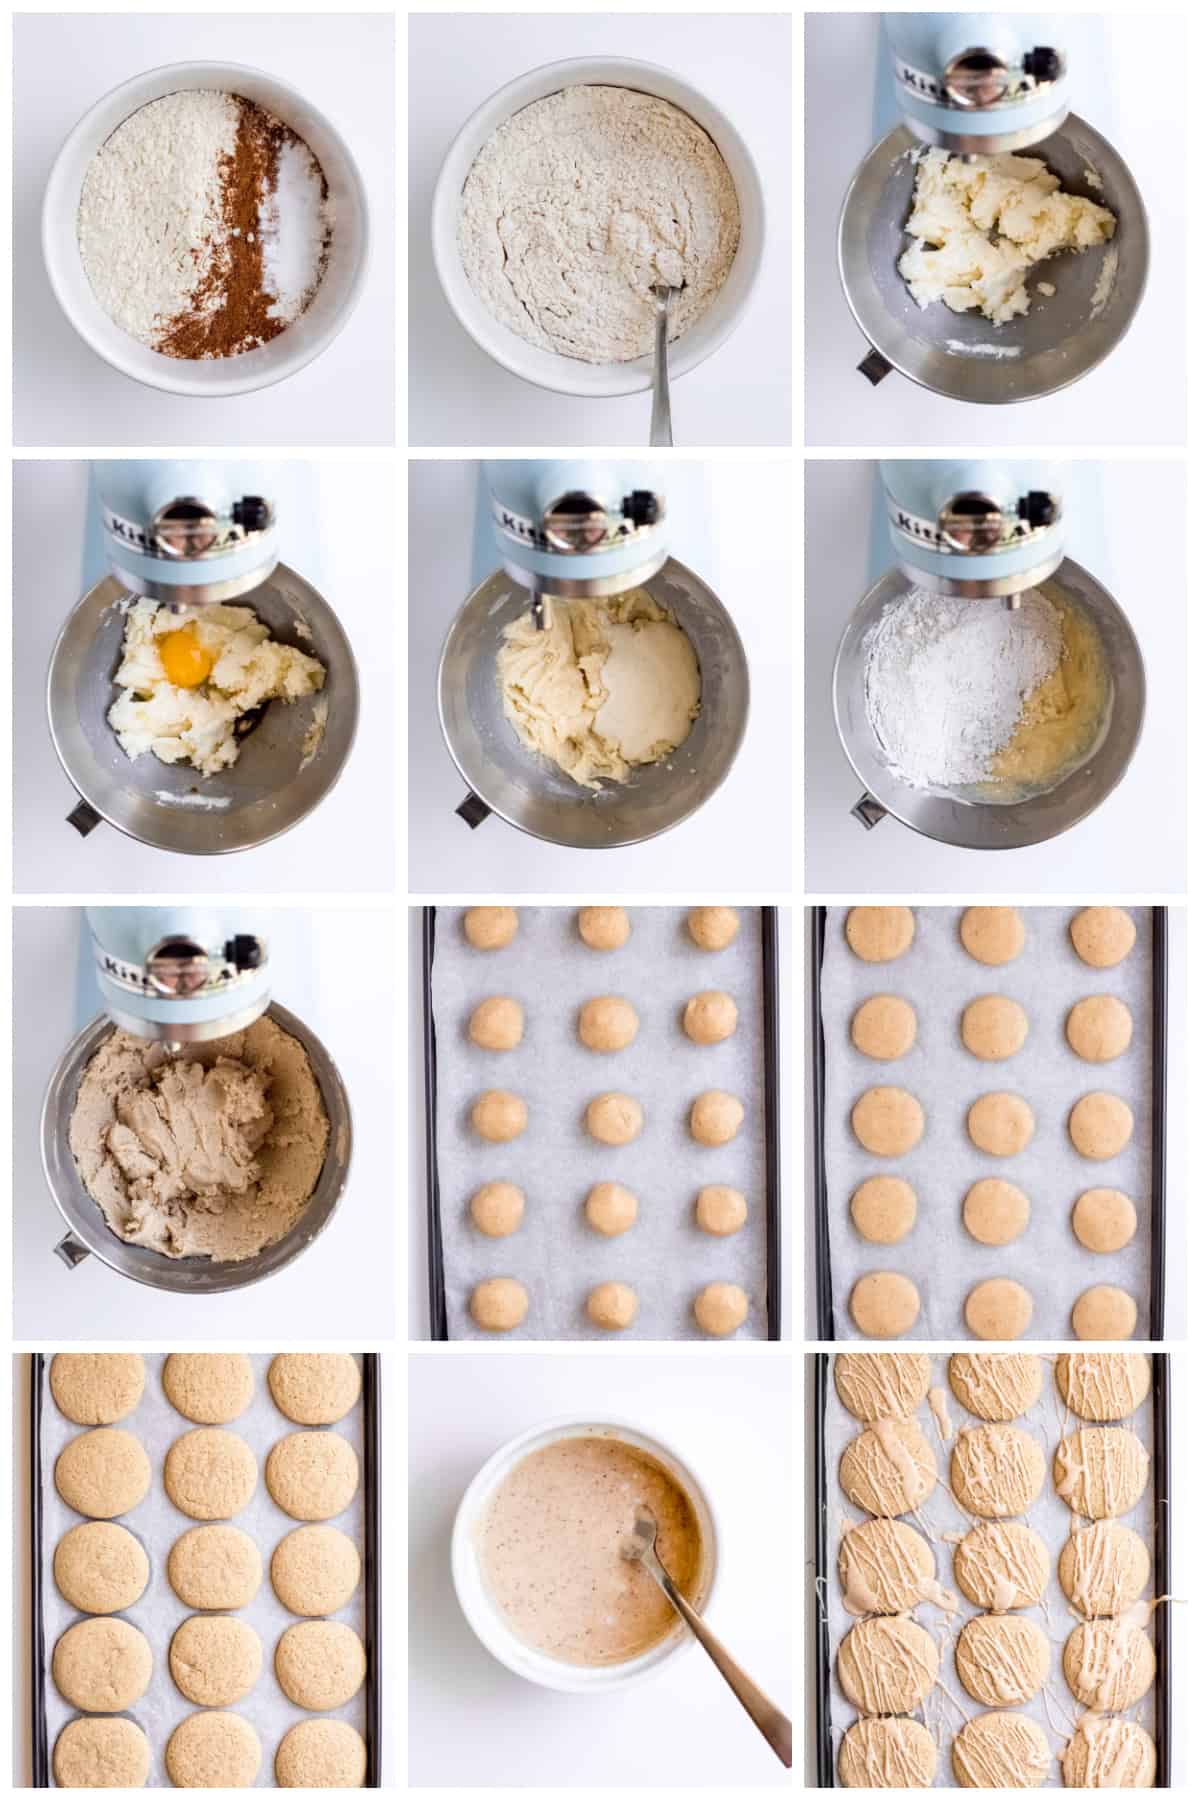 Step by step photos on how to make Eggnog Cookies.